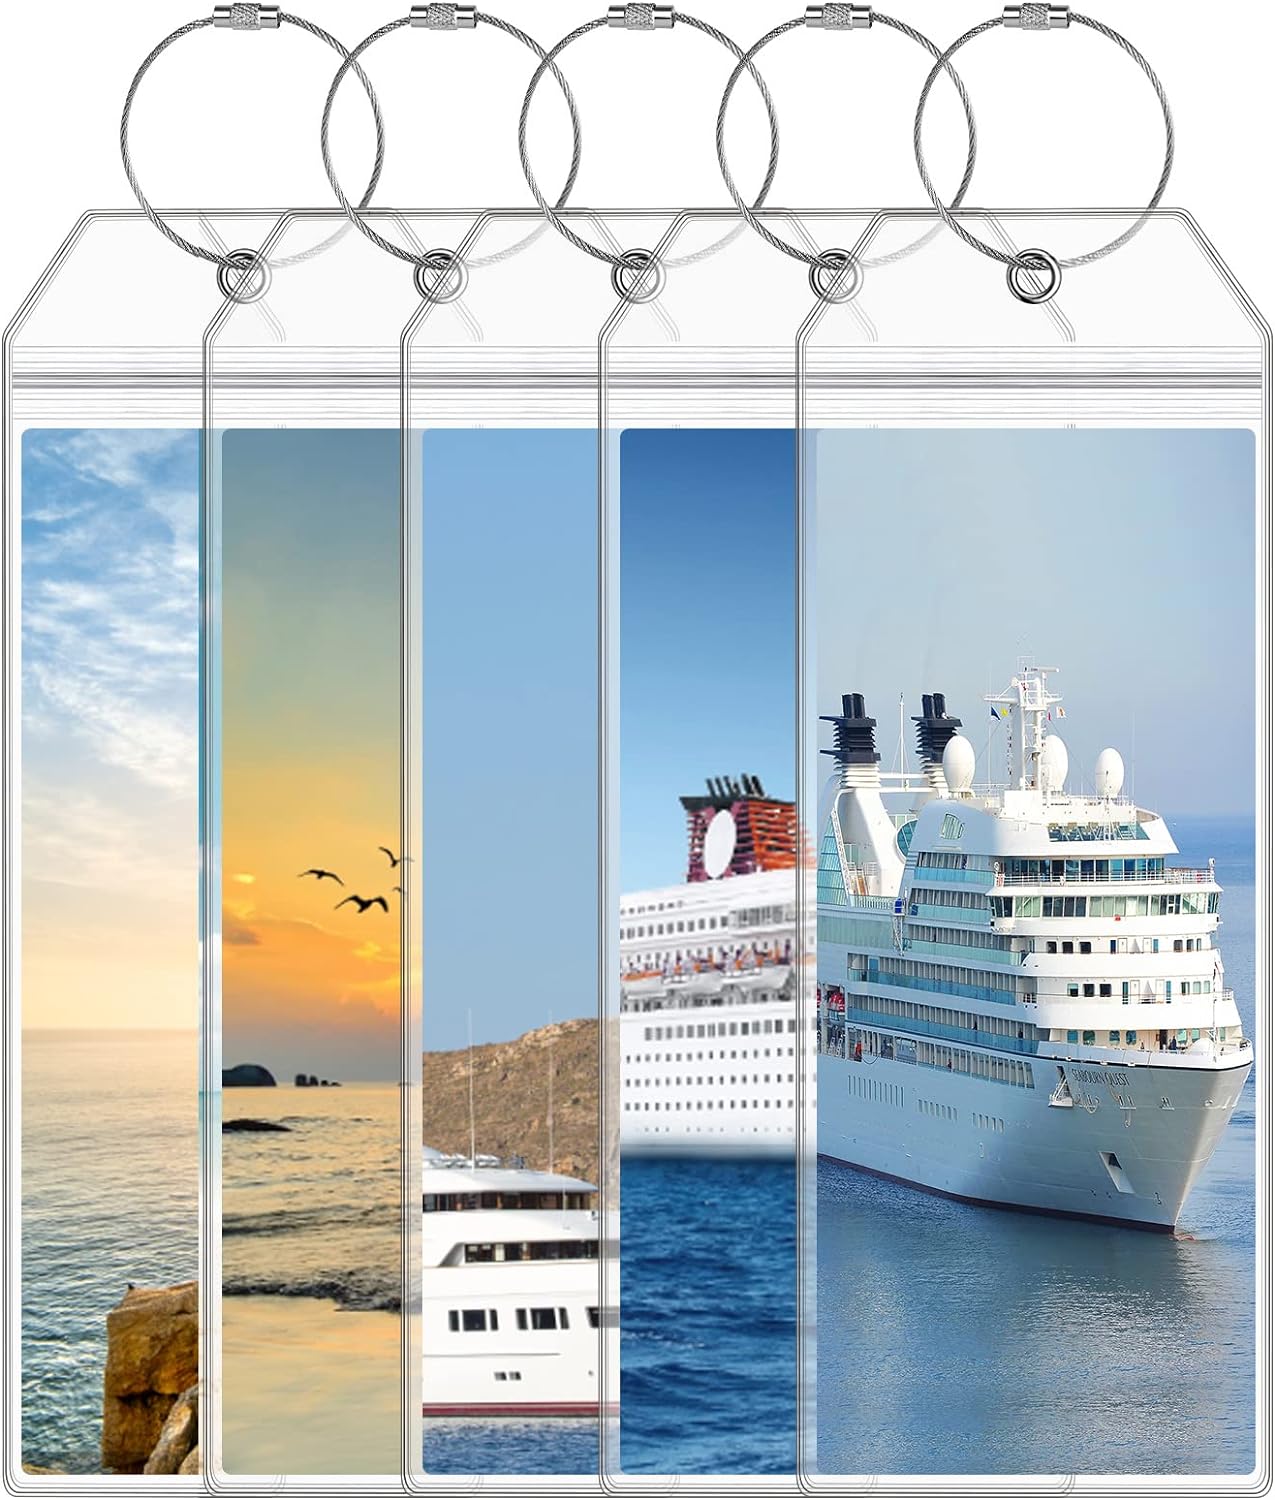 Luggage Tag for Cruise Ship Essentials 6 Pack for NCL Princess Carnival Cruise Luggage Tags by seavilia(Wide 6 Pack)